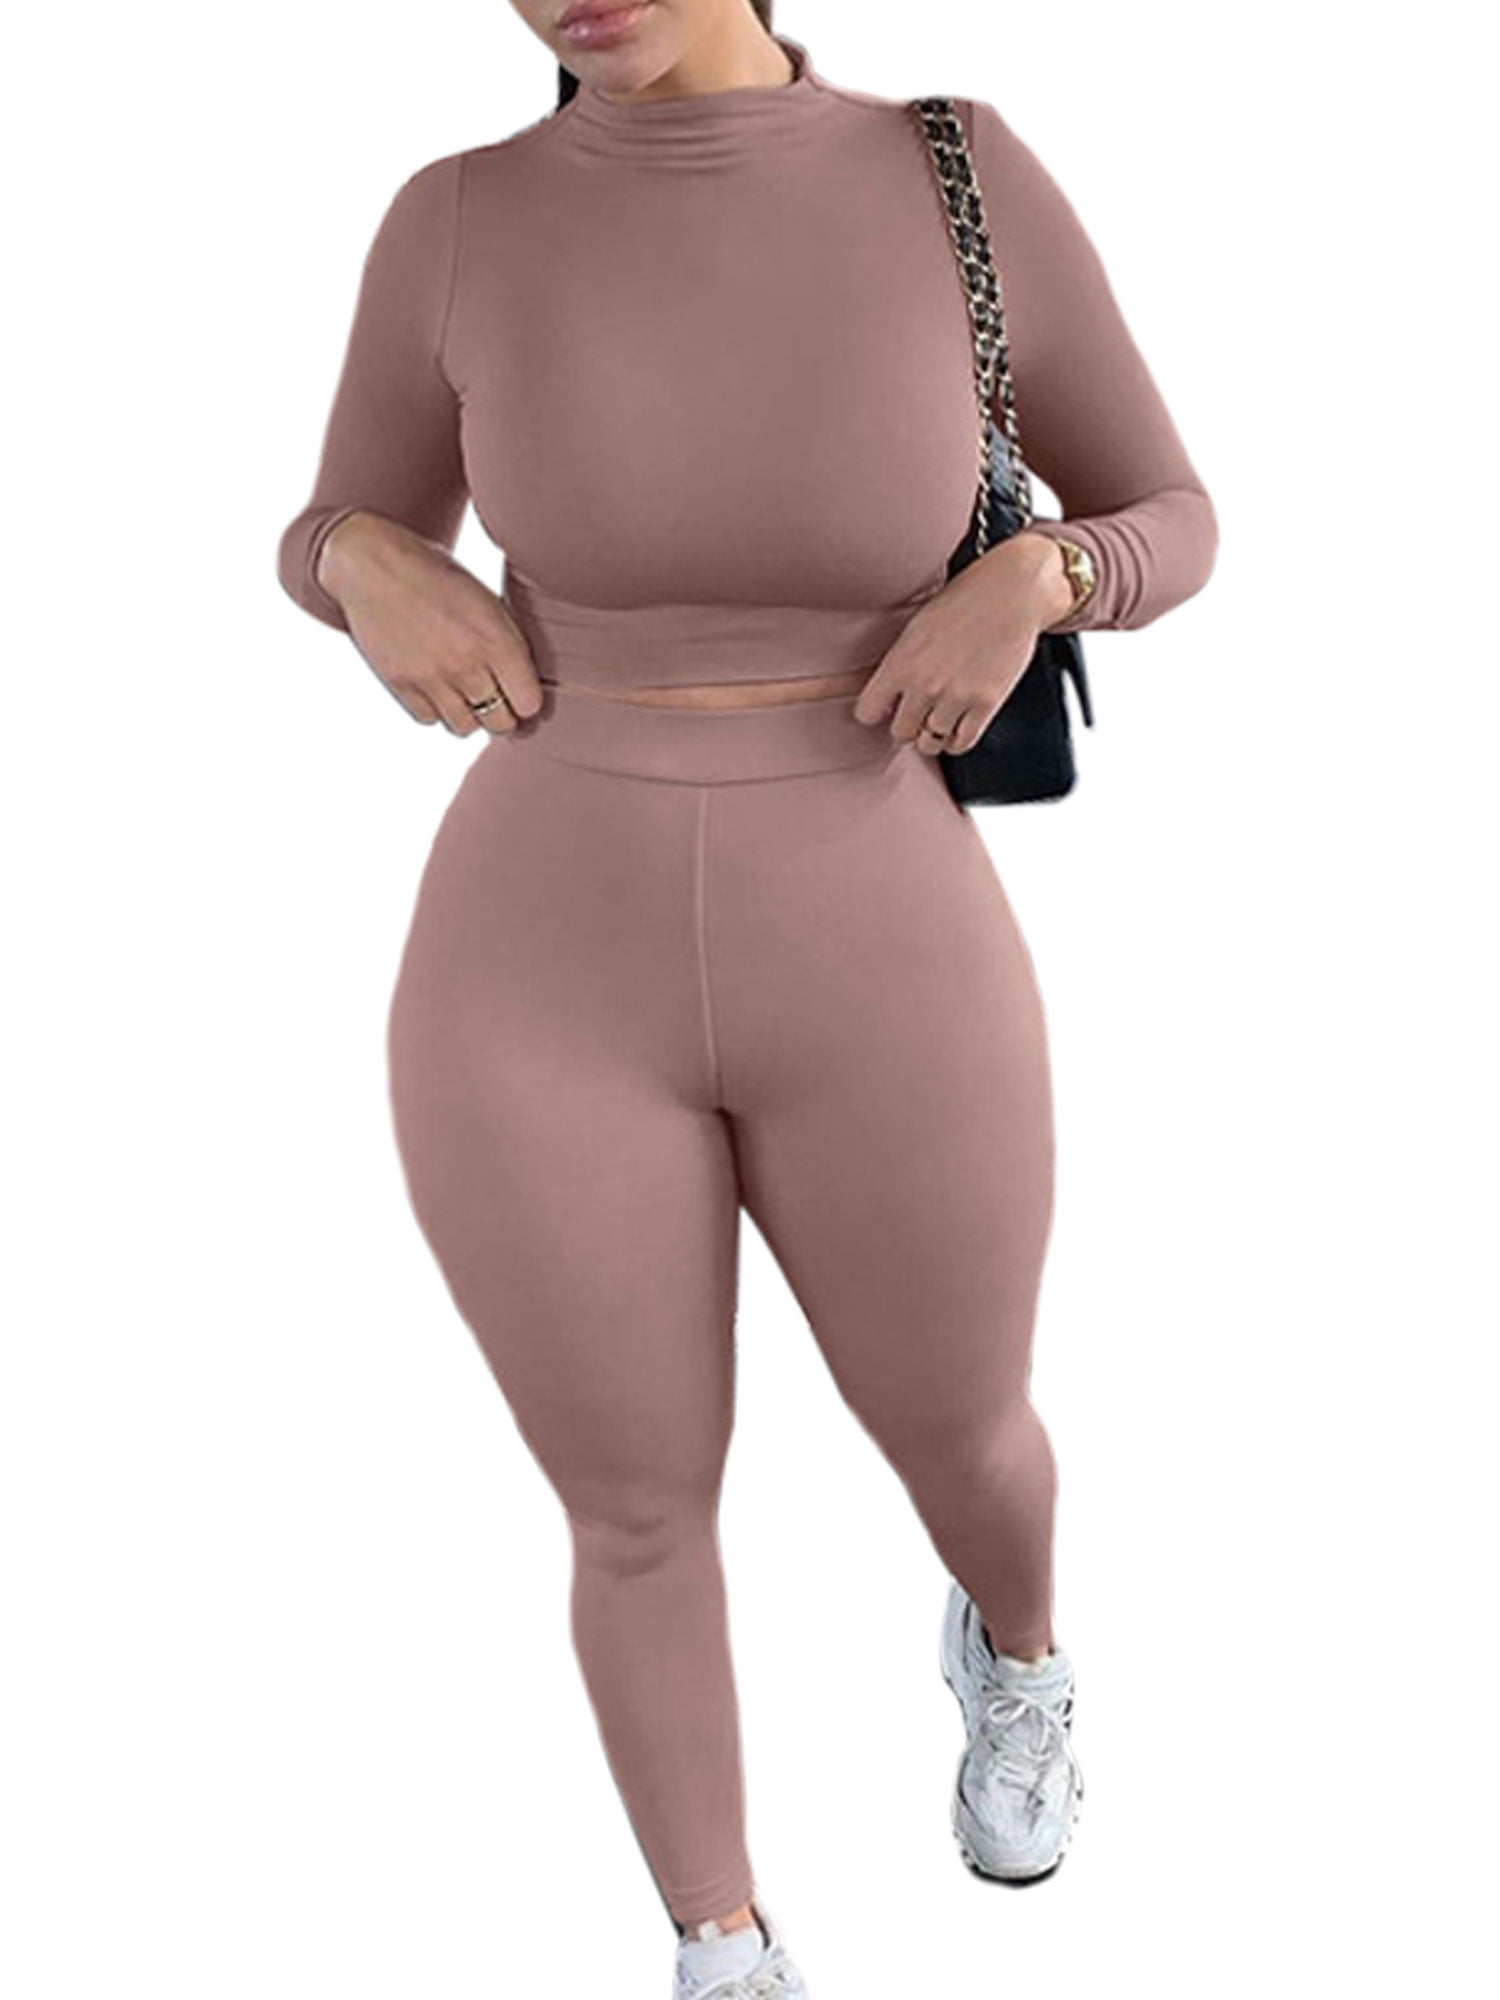 Workout Sets for Women 2 Piece Seamless Yoga Outfit Tracksuit High